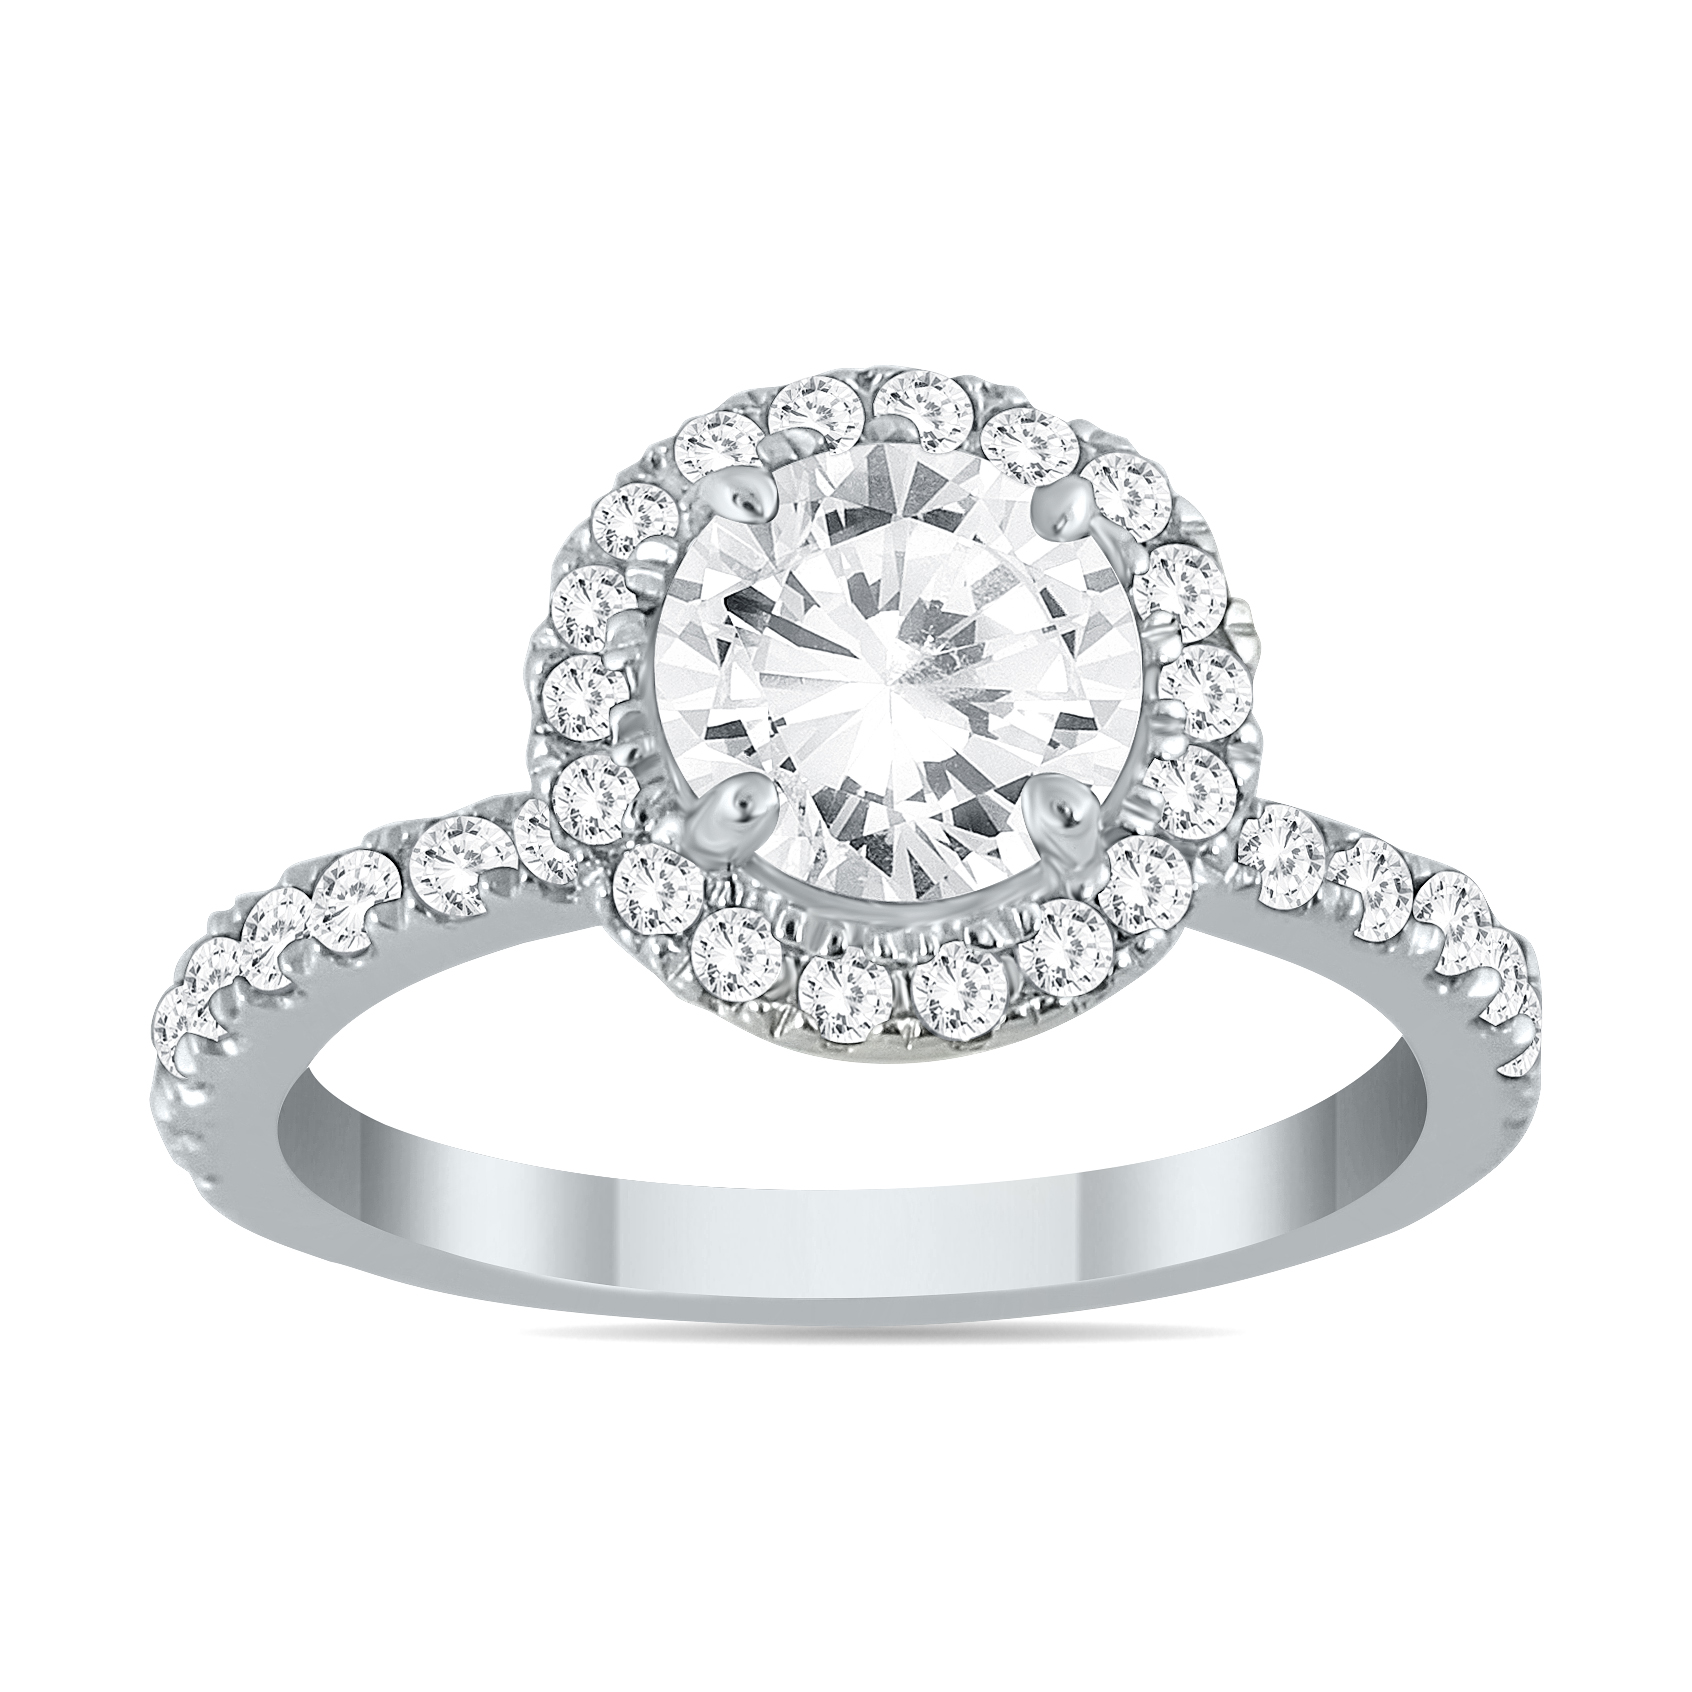 szul.com AGS Certified 1 1/2 Carat Eternity Halo Diamond Engagement Ring in 14K White Gold (H-I Color, I1-I2